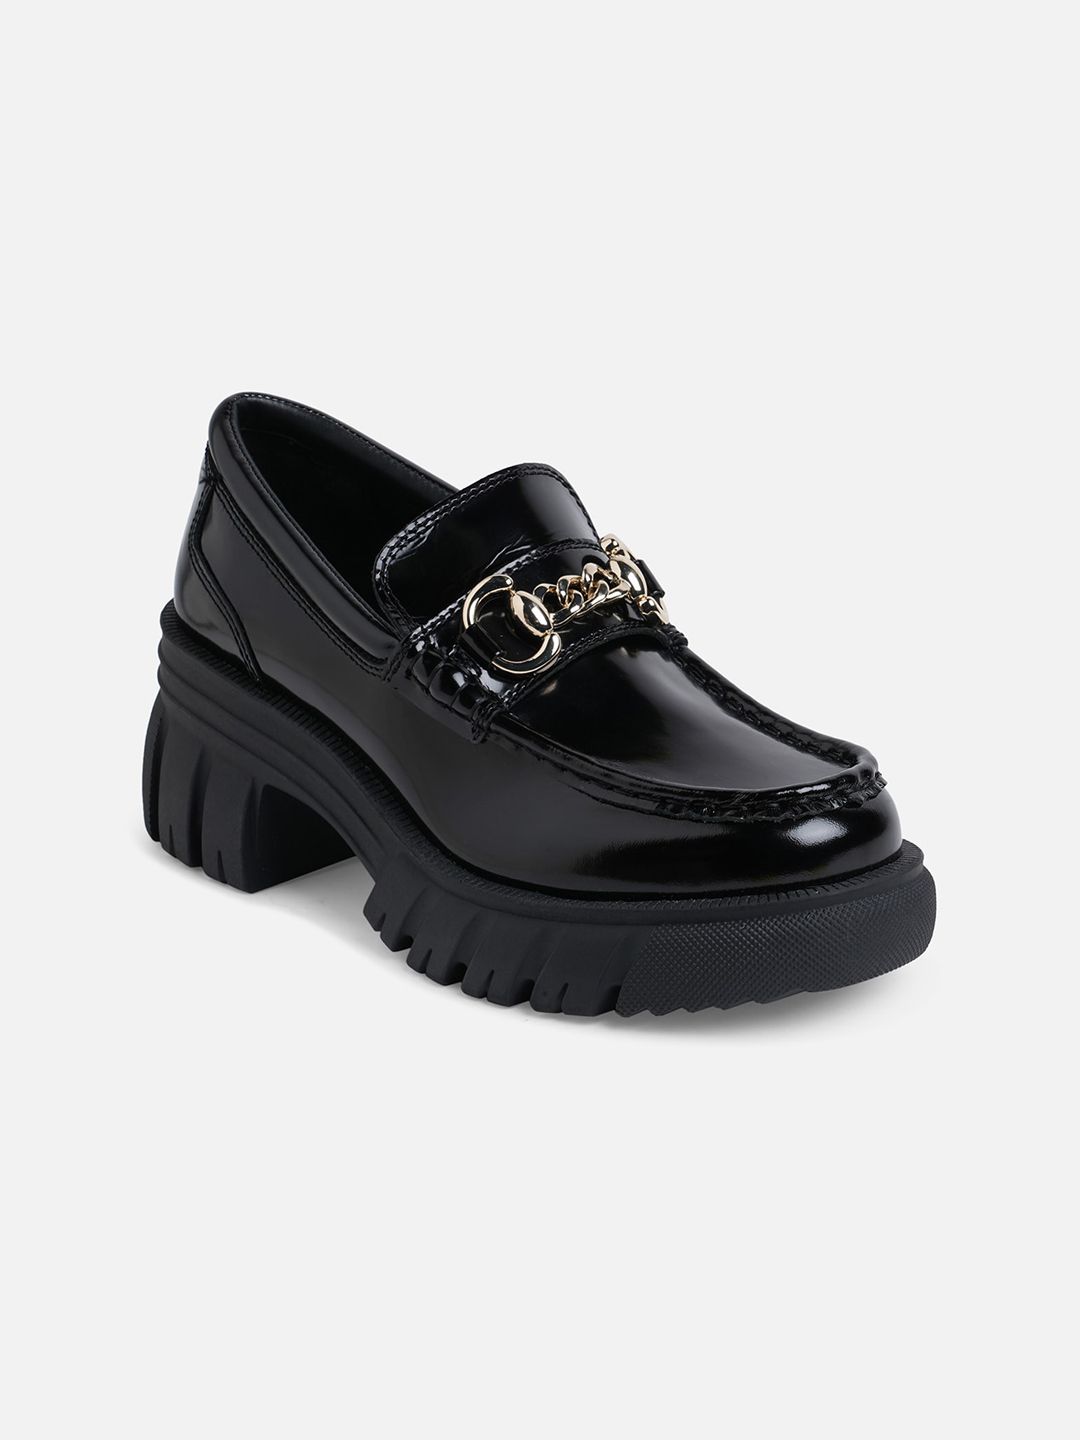 ALDO Women Black Leather Solid Heeled Loafers Price in India